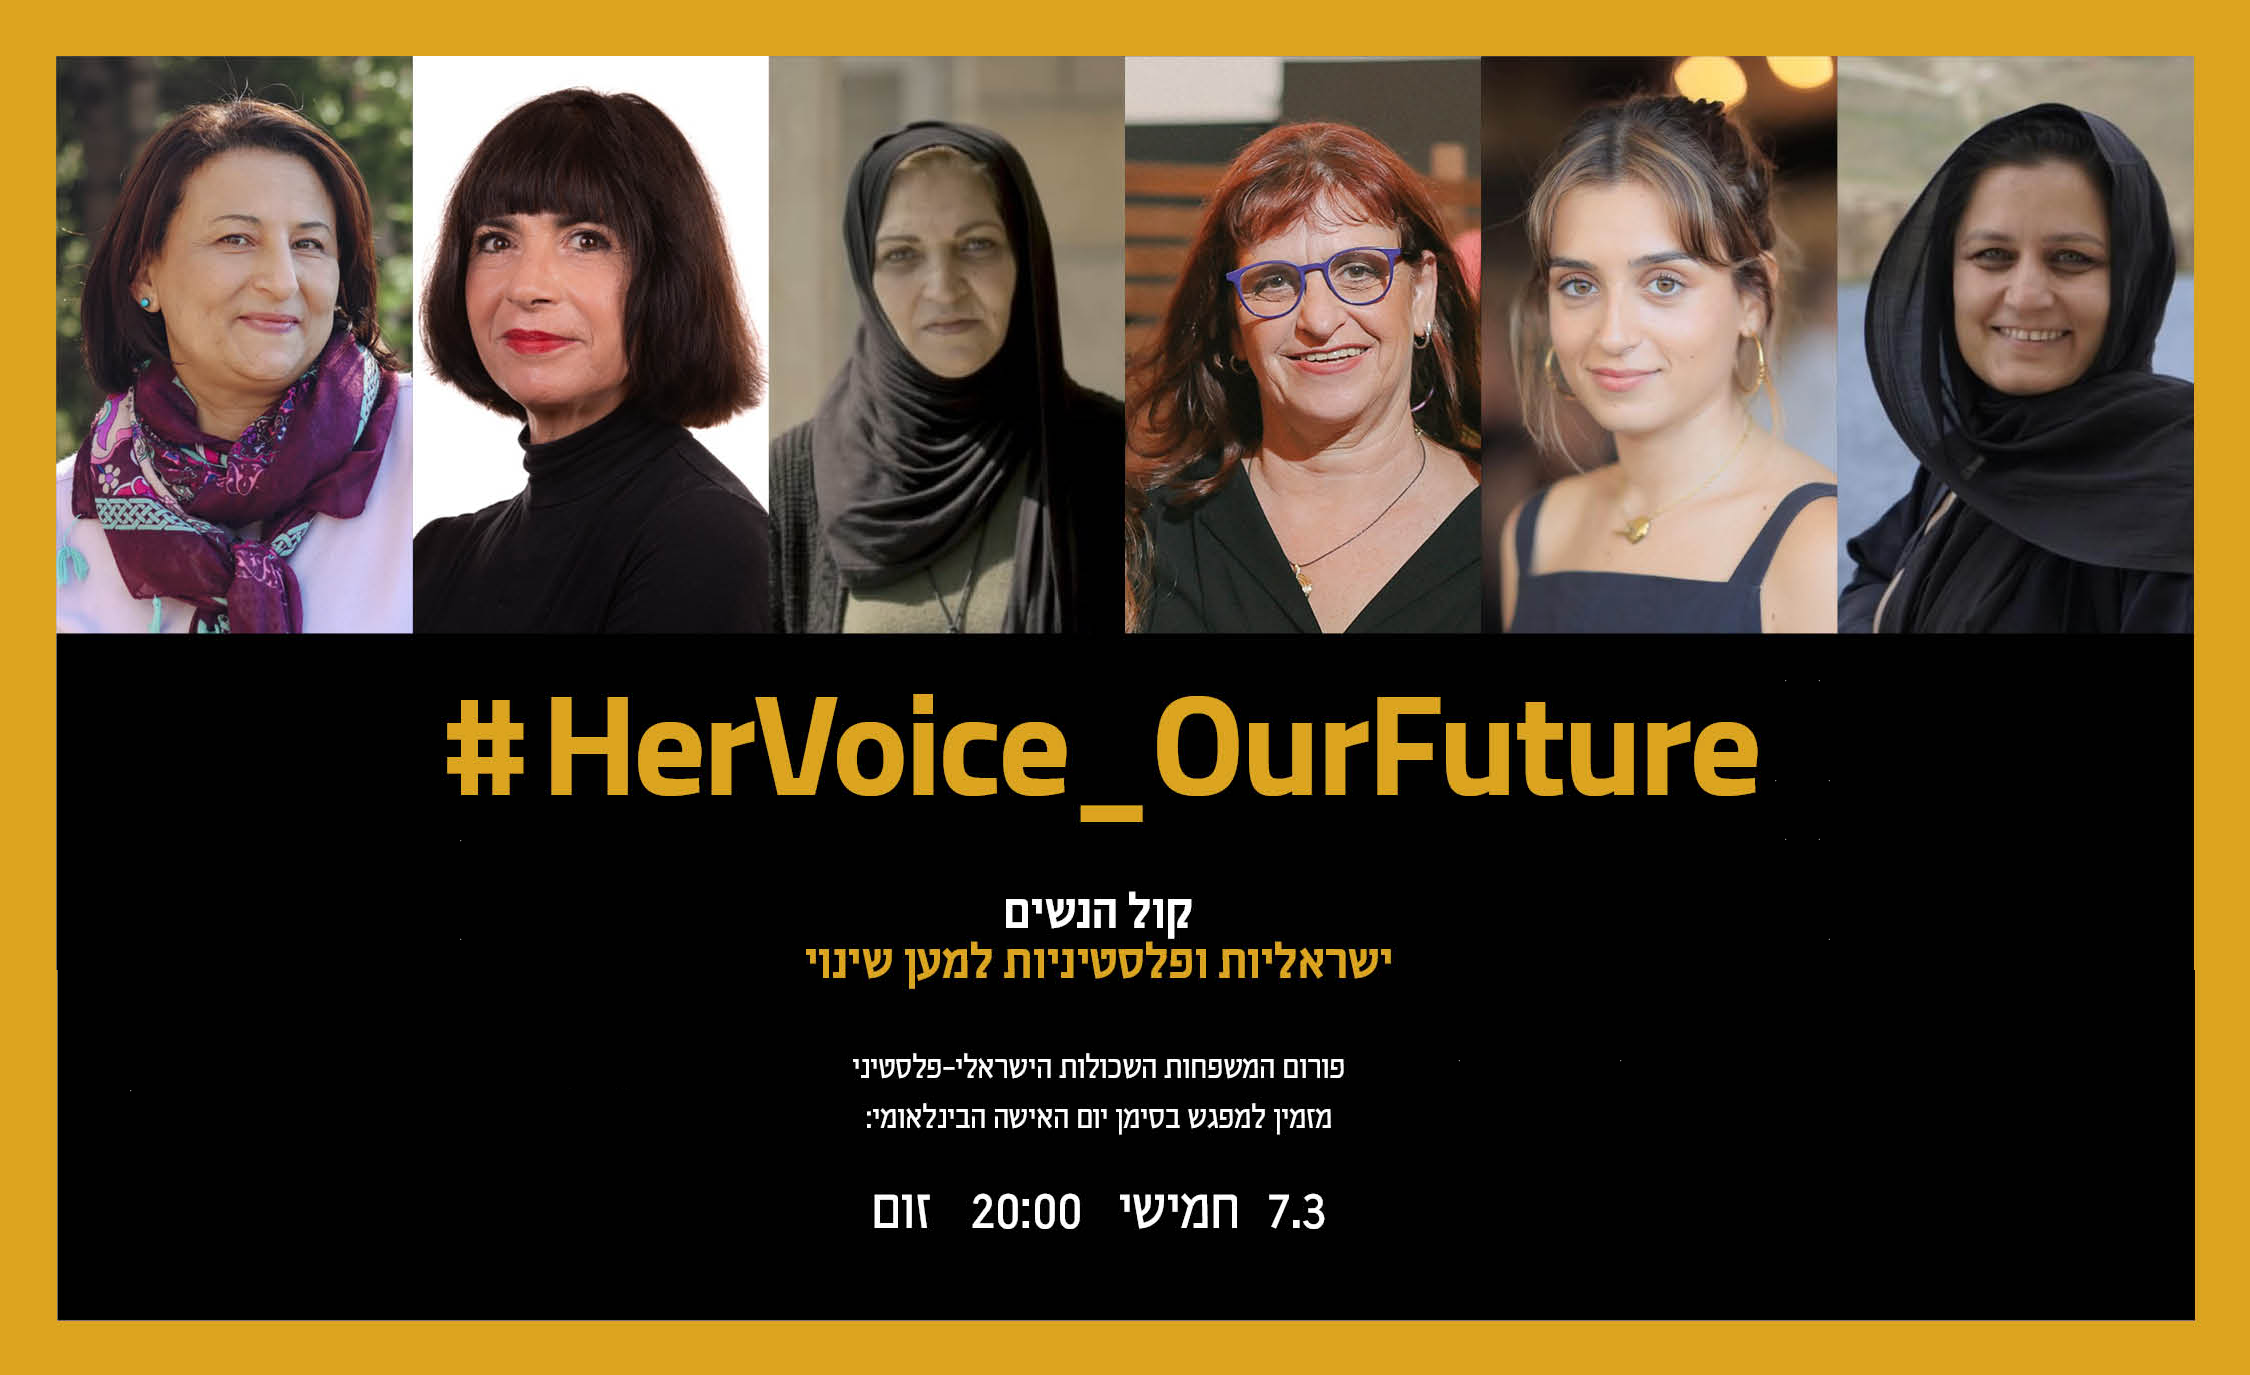 [WEBINAR] Her Voice, Our Future